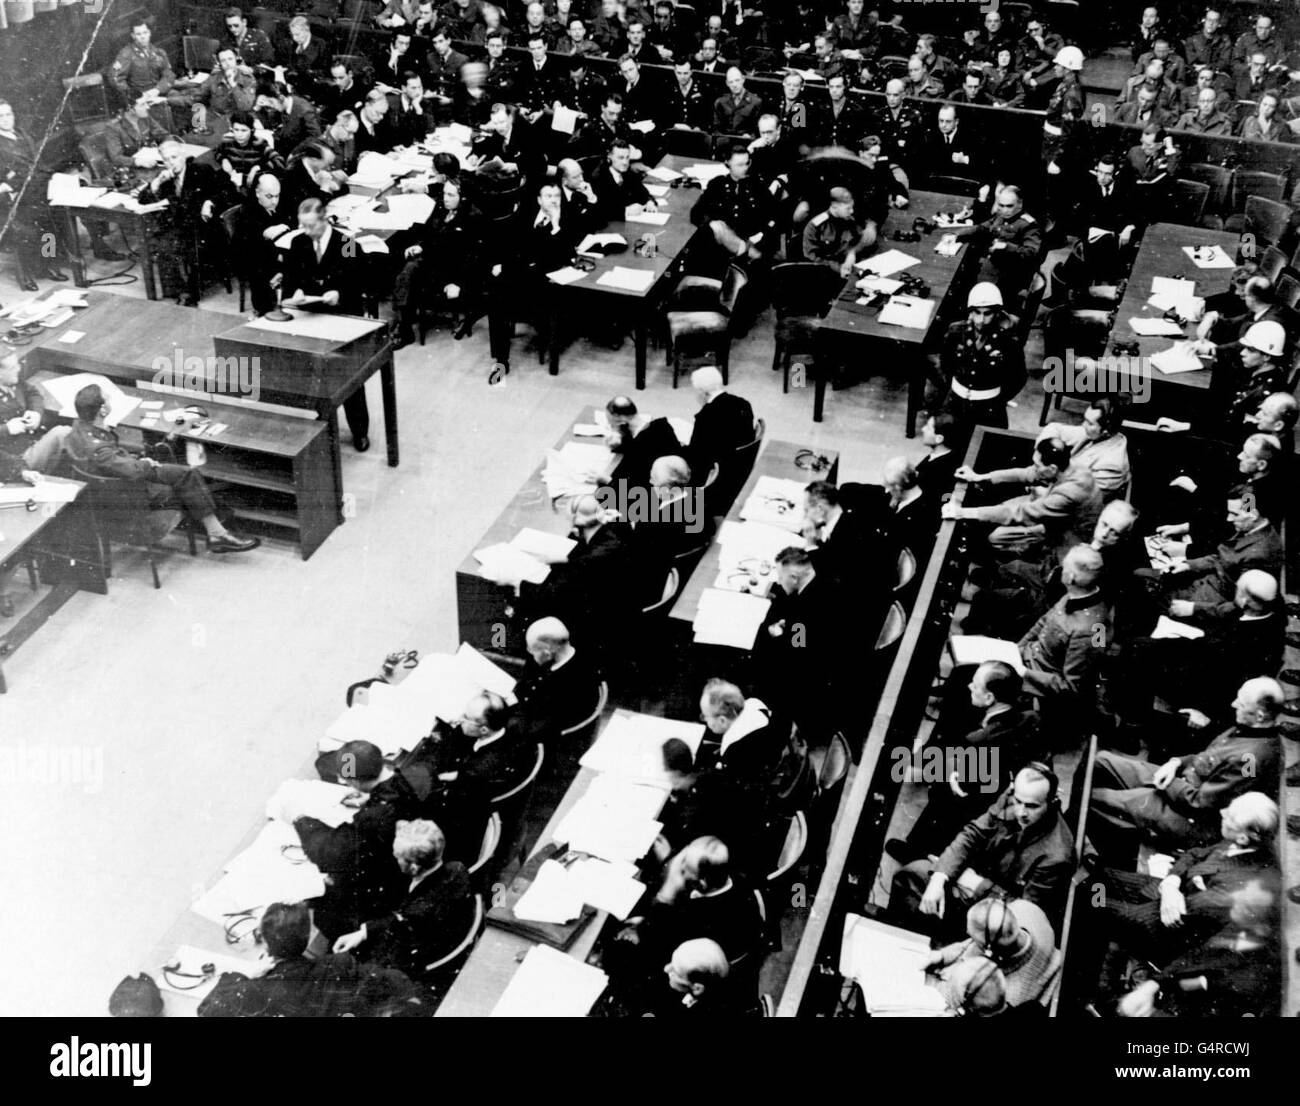 A general view of the post-Second World War Nuremberg trials in progress at the Palace of Justice. The former Nazi leaders of Germany can be seen seated to the right of the photograph. They include Goering, Ribbentrop, Keitel, Jodl, Kaltenbrunner and Hess. Stock Photo